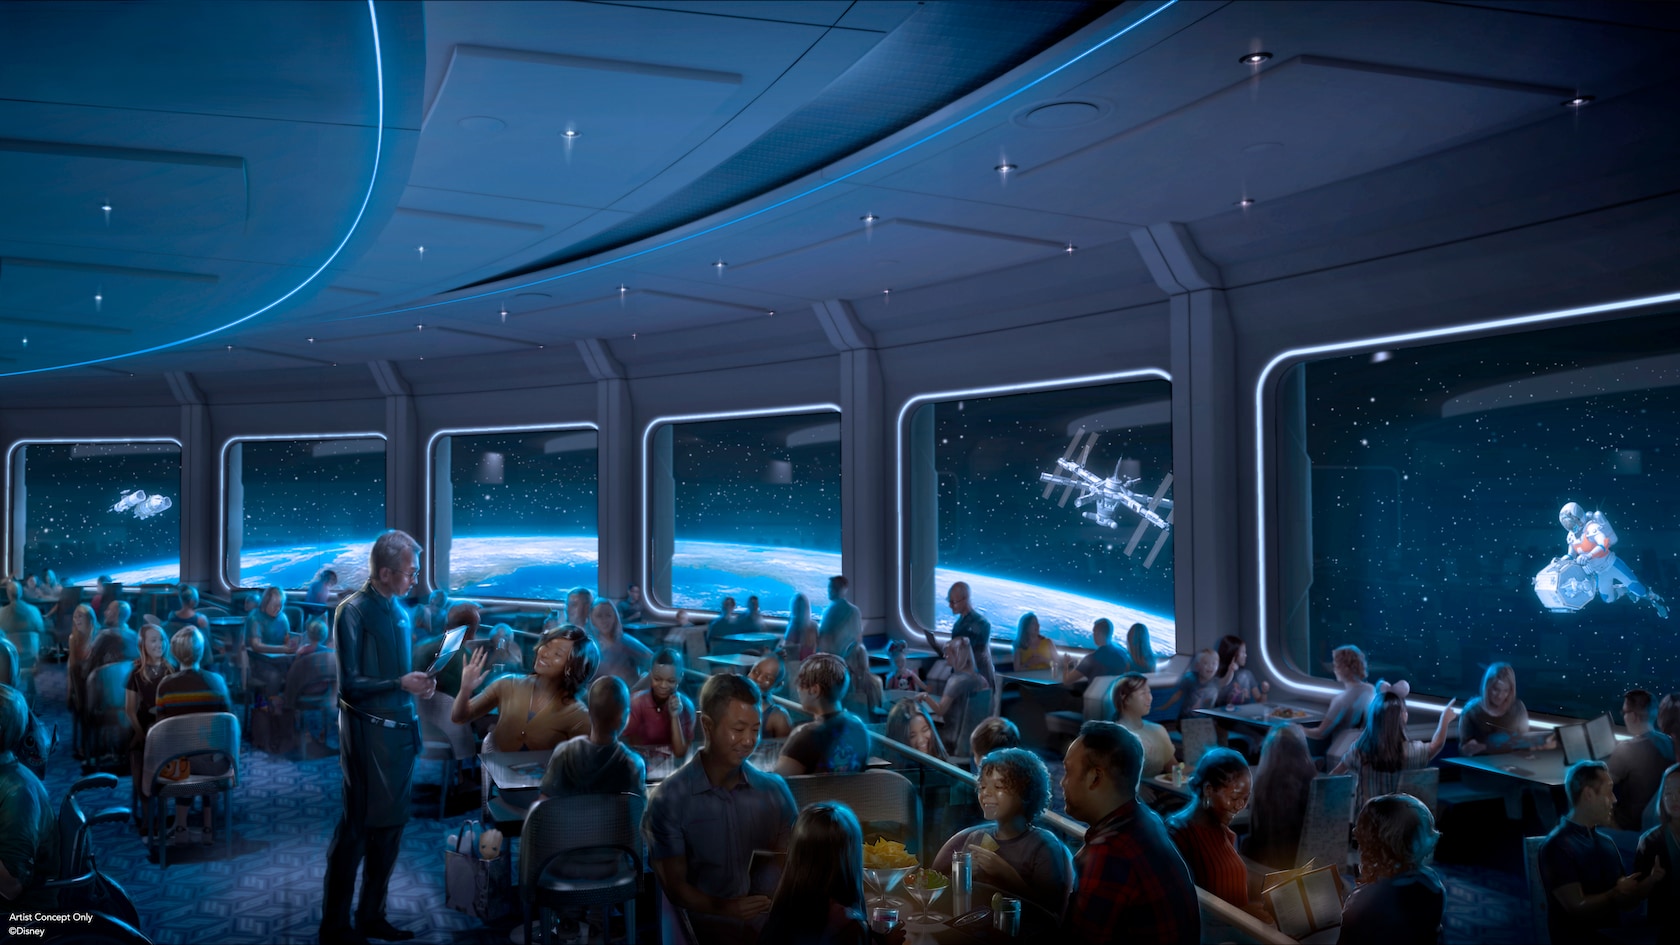 A rendering of a crowded restaurant themed to look like a space station just above the planet Earth